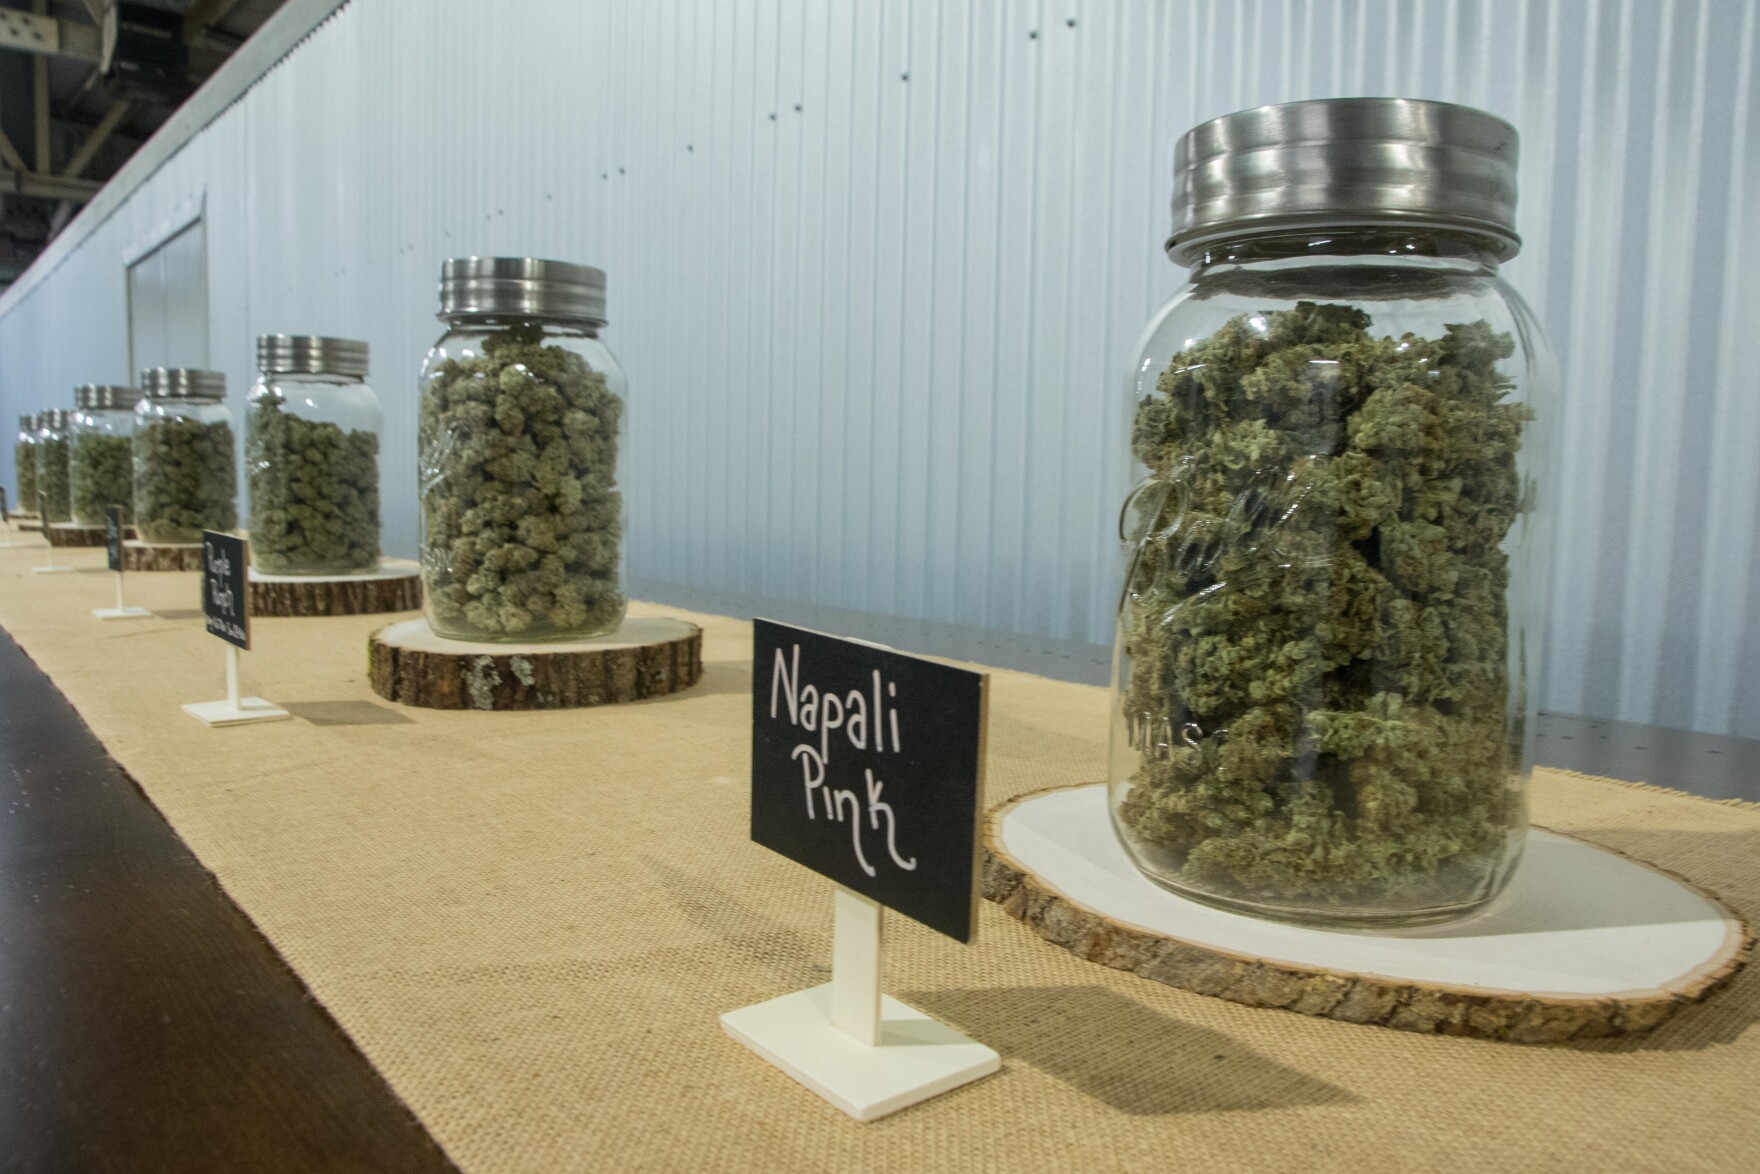 How Recreational Weed Transformed A Small California Town